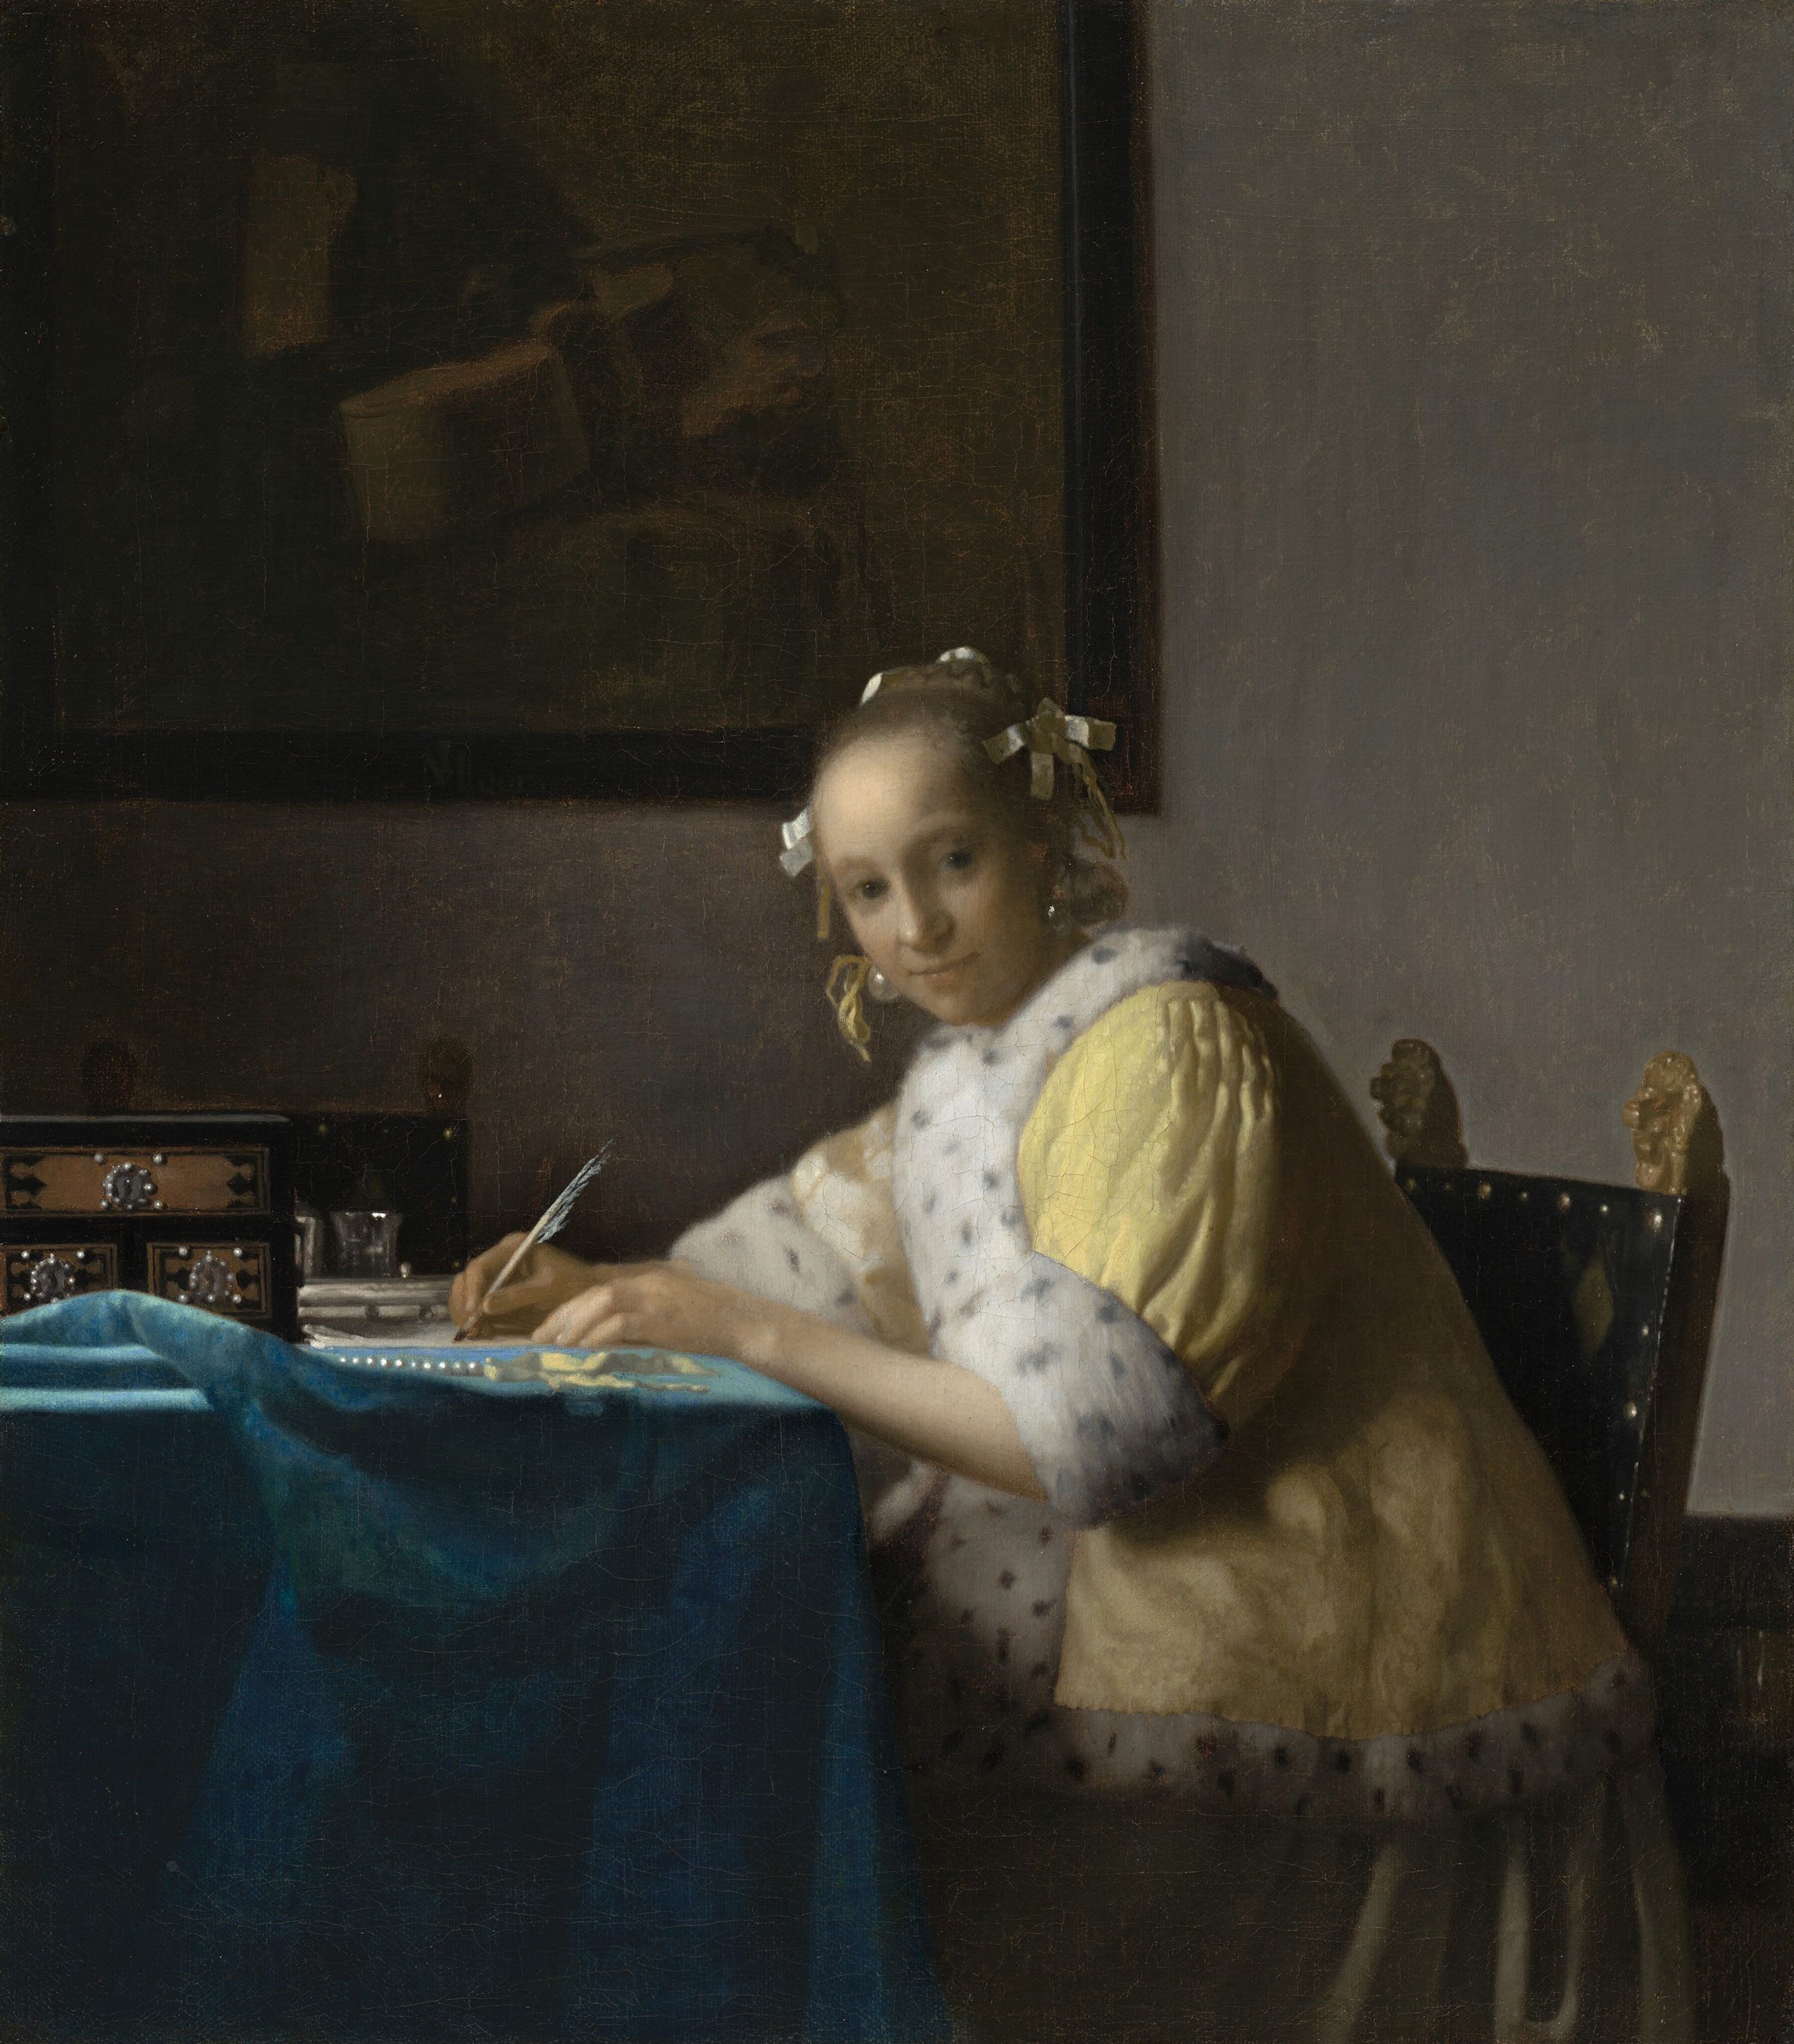 Johannes Vermeer, "Jeune fille écrivant une lettre", 1664-67. National Gallery of Art, Washington. Gift of Harry Waldron Havemeyer and Horace Havemeyer Jr., in memory of their father, Horace Havemeyer